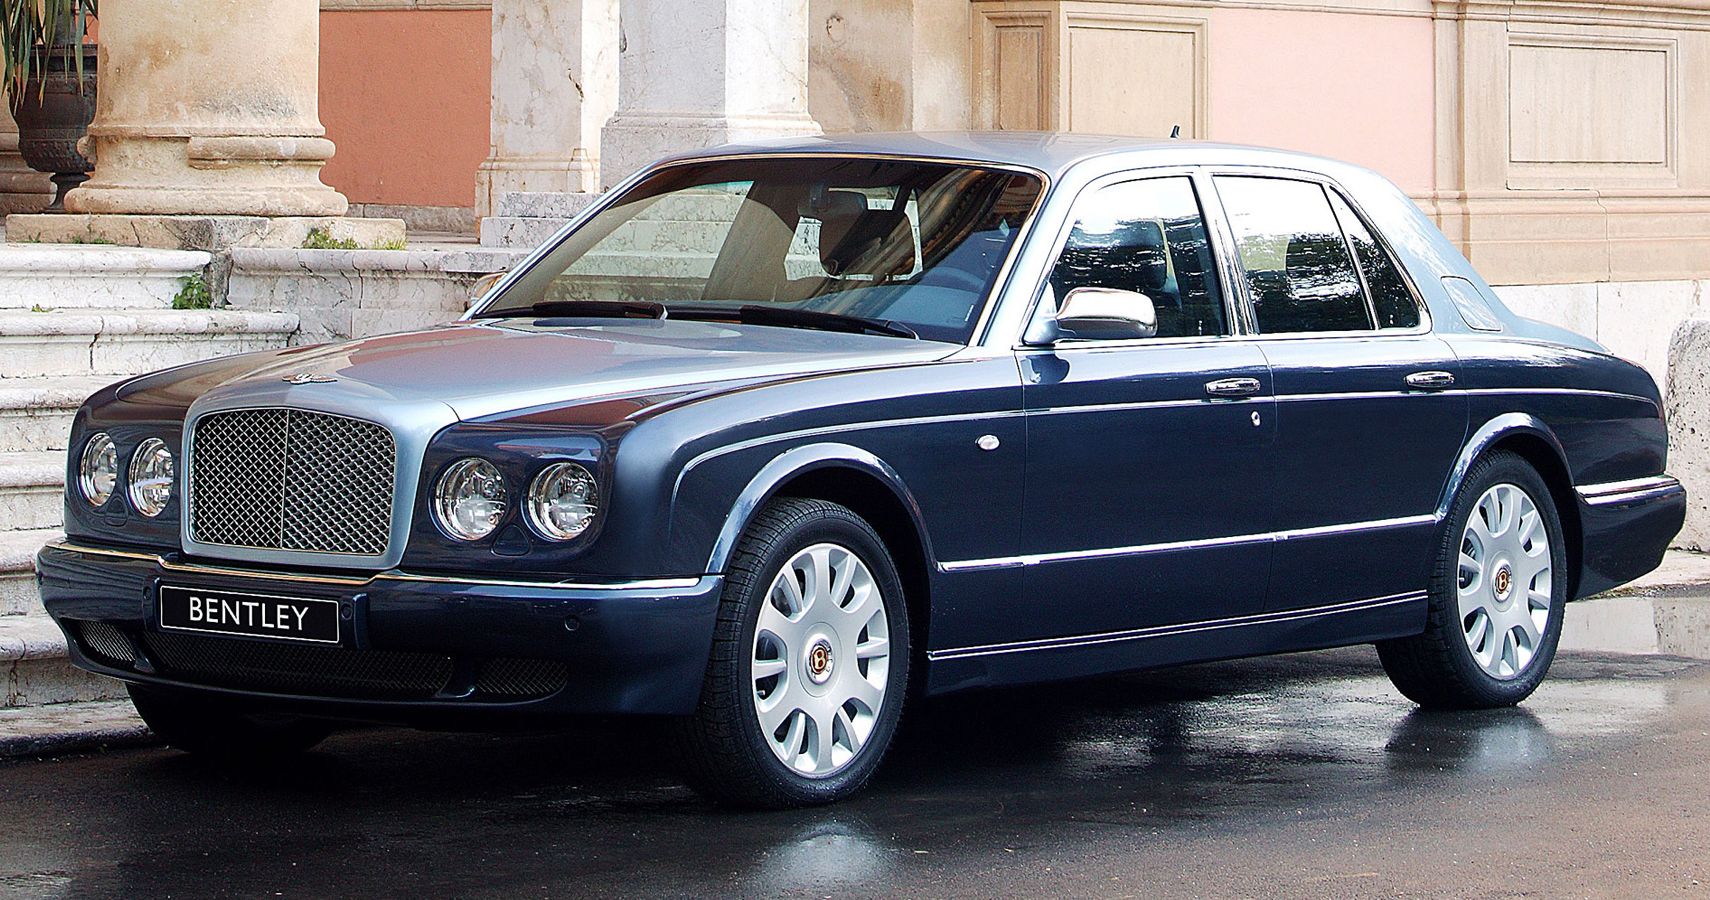 Bentley Arnage Front Quarter Two Tone Oxford Blue Neptune